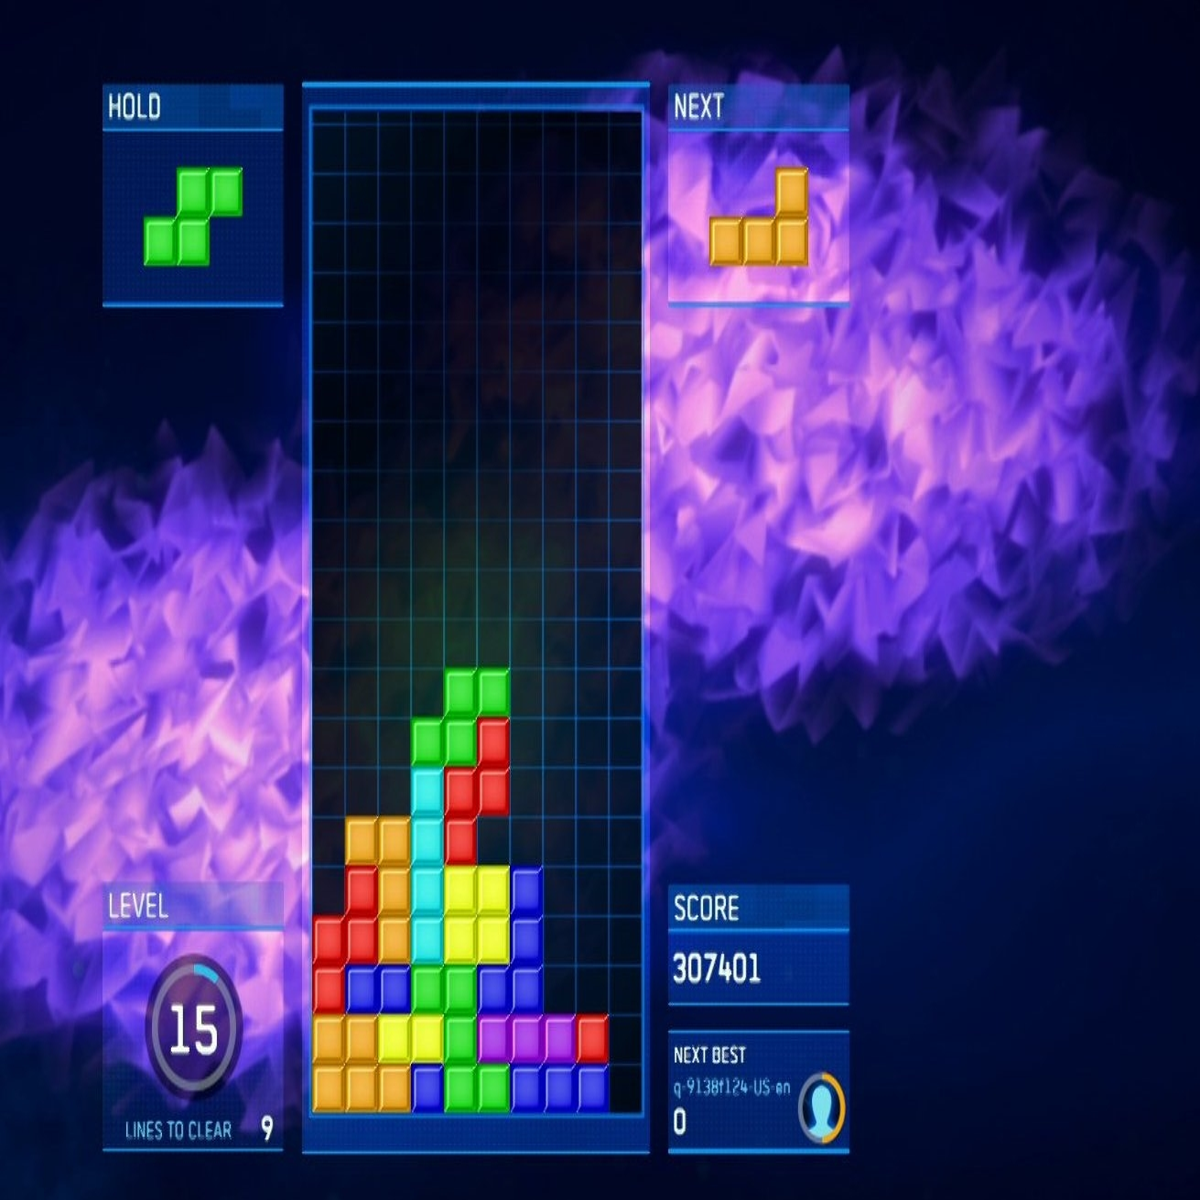 This is what Tetris looks like on PS4 and Xbox One 